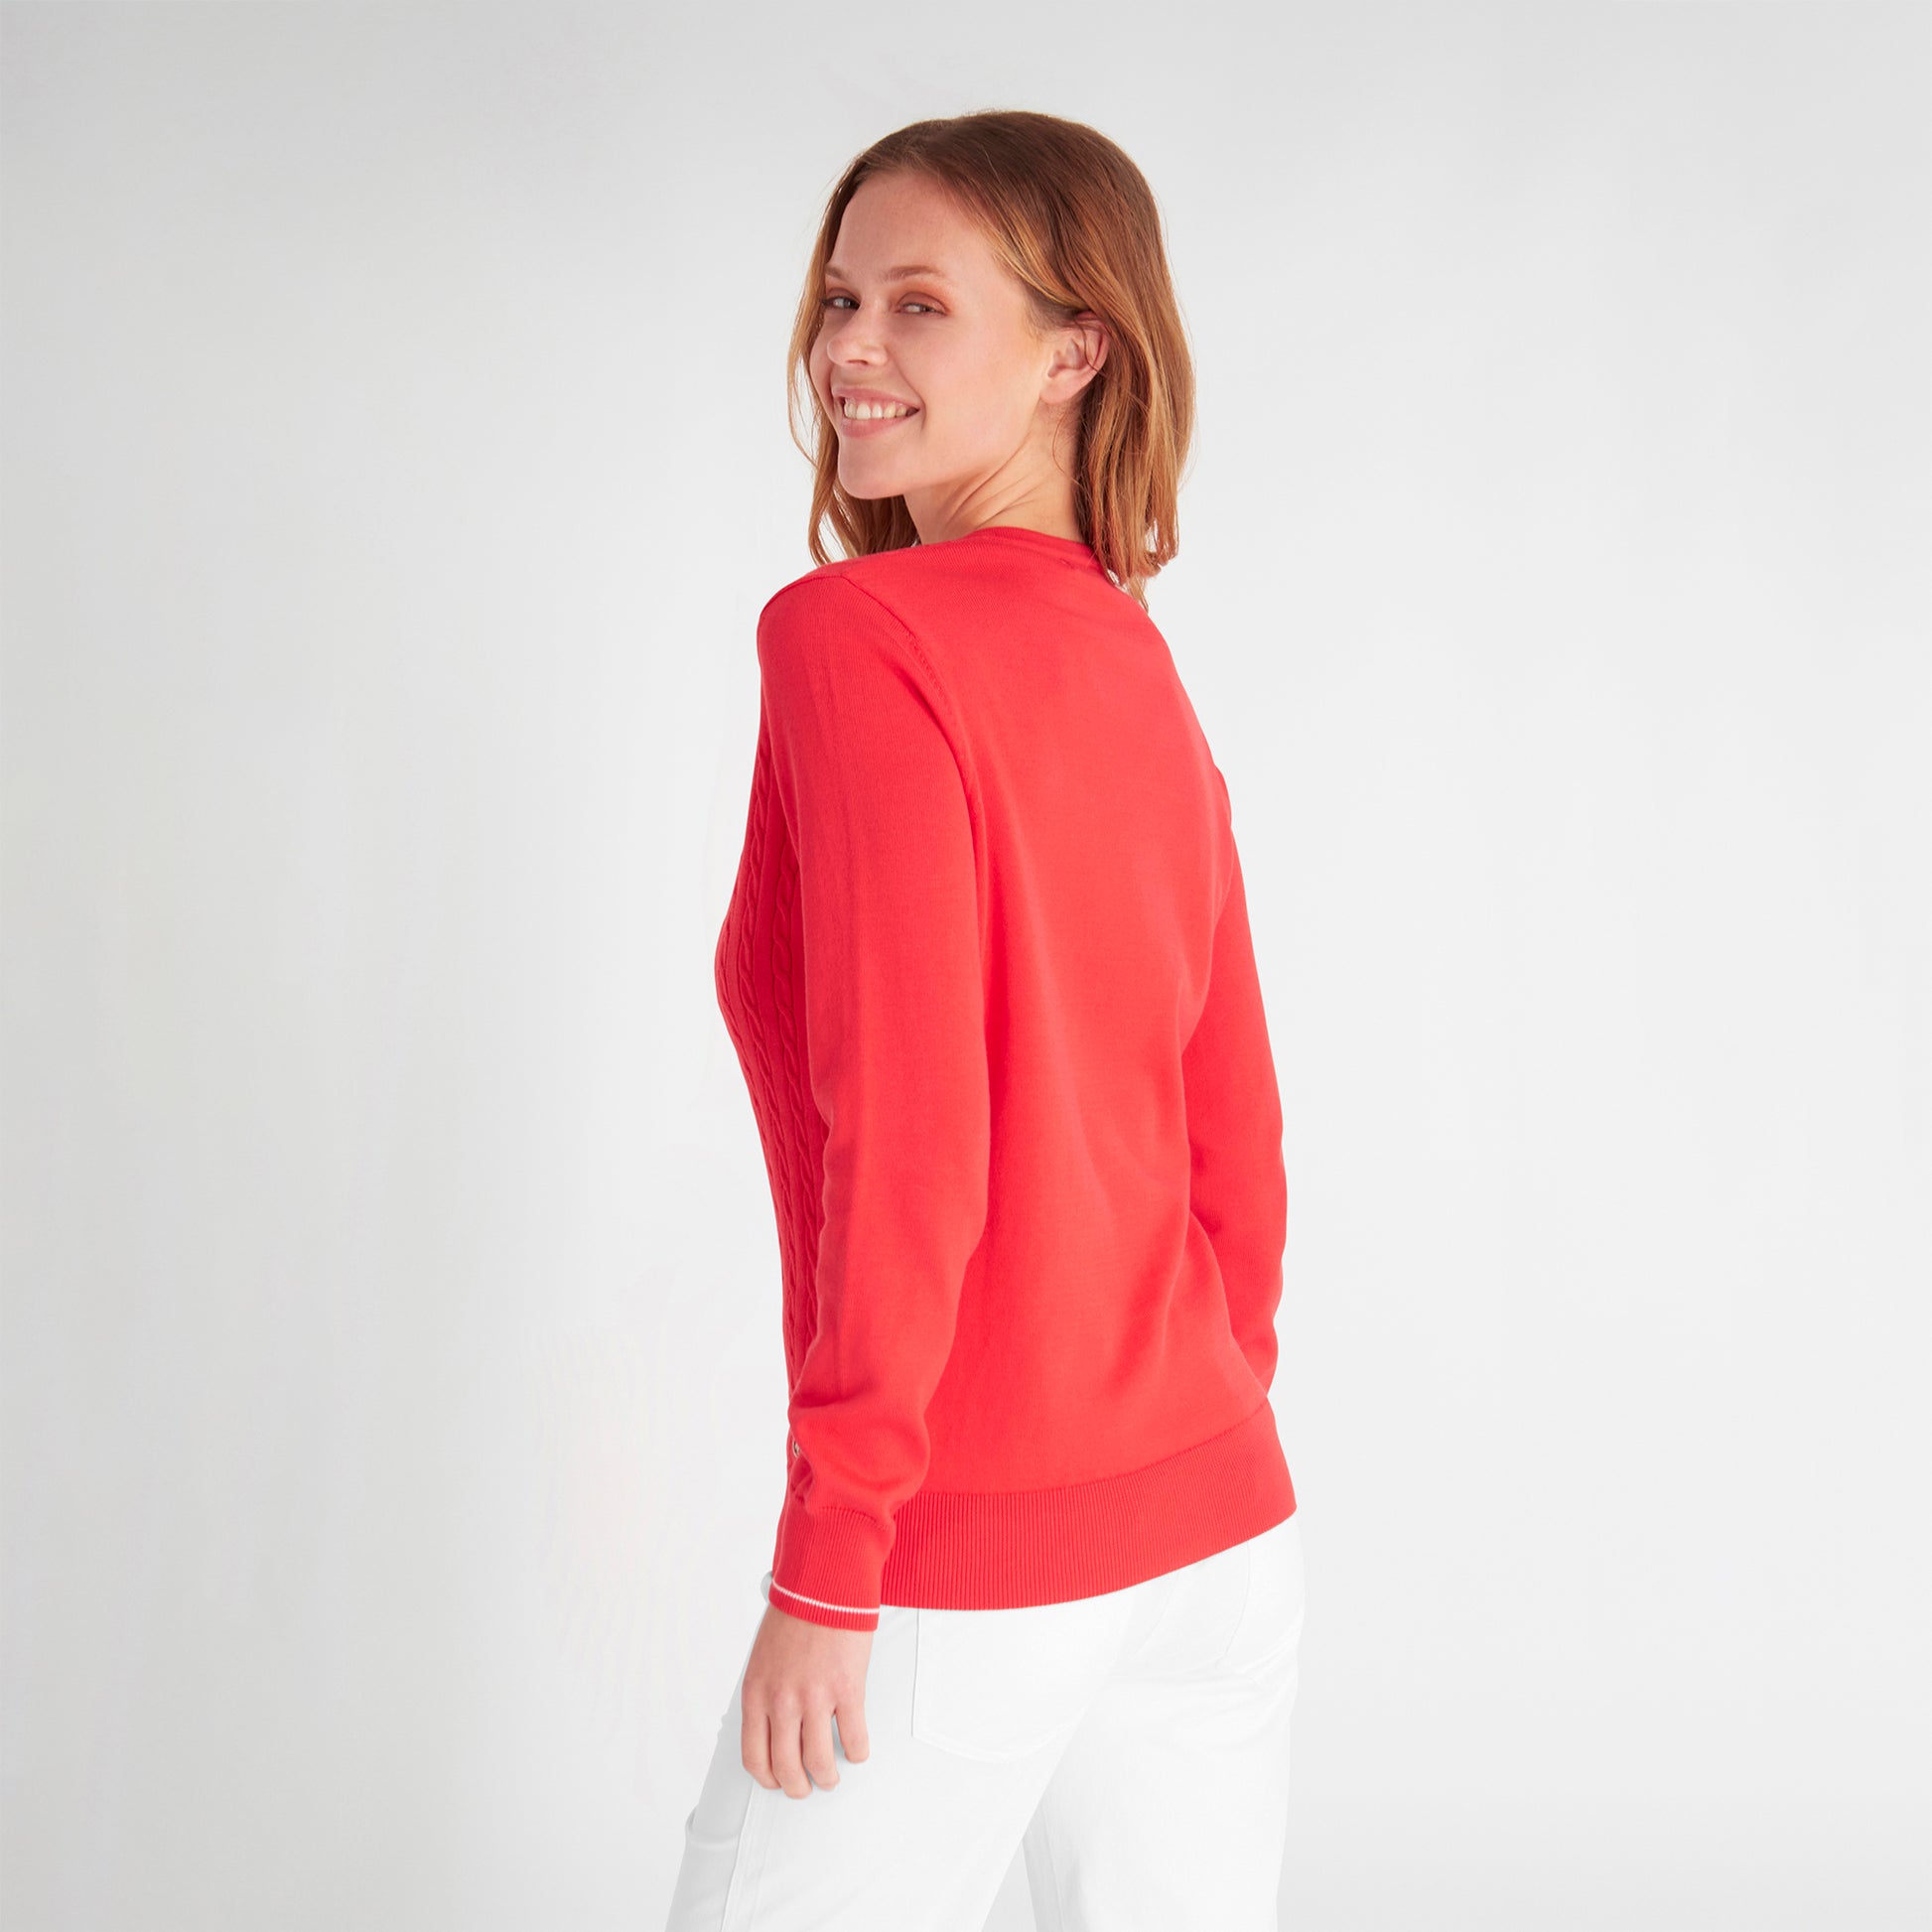 Green Lamb Ladies Cable Knit V-Neck Sweater in Poppy